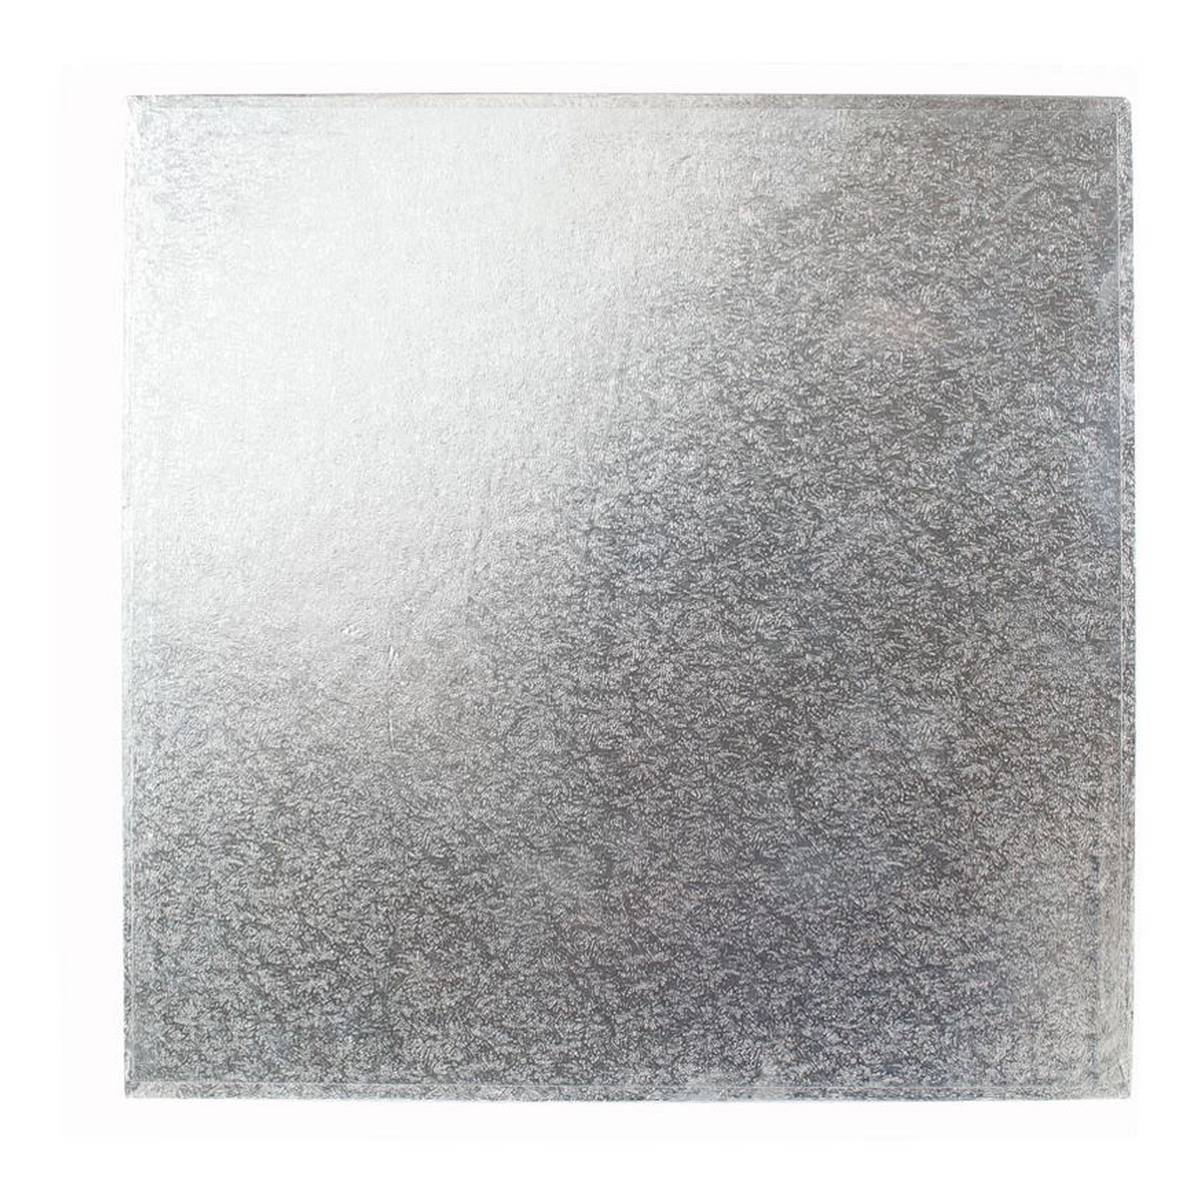 Round & Square Silver Cake Drums 5mm Thick Board | Sizes Ratton Pantry